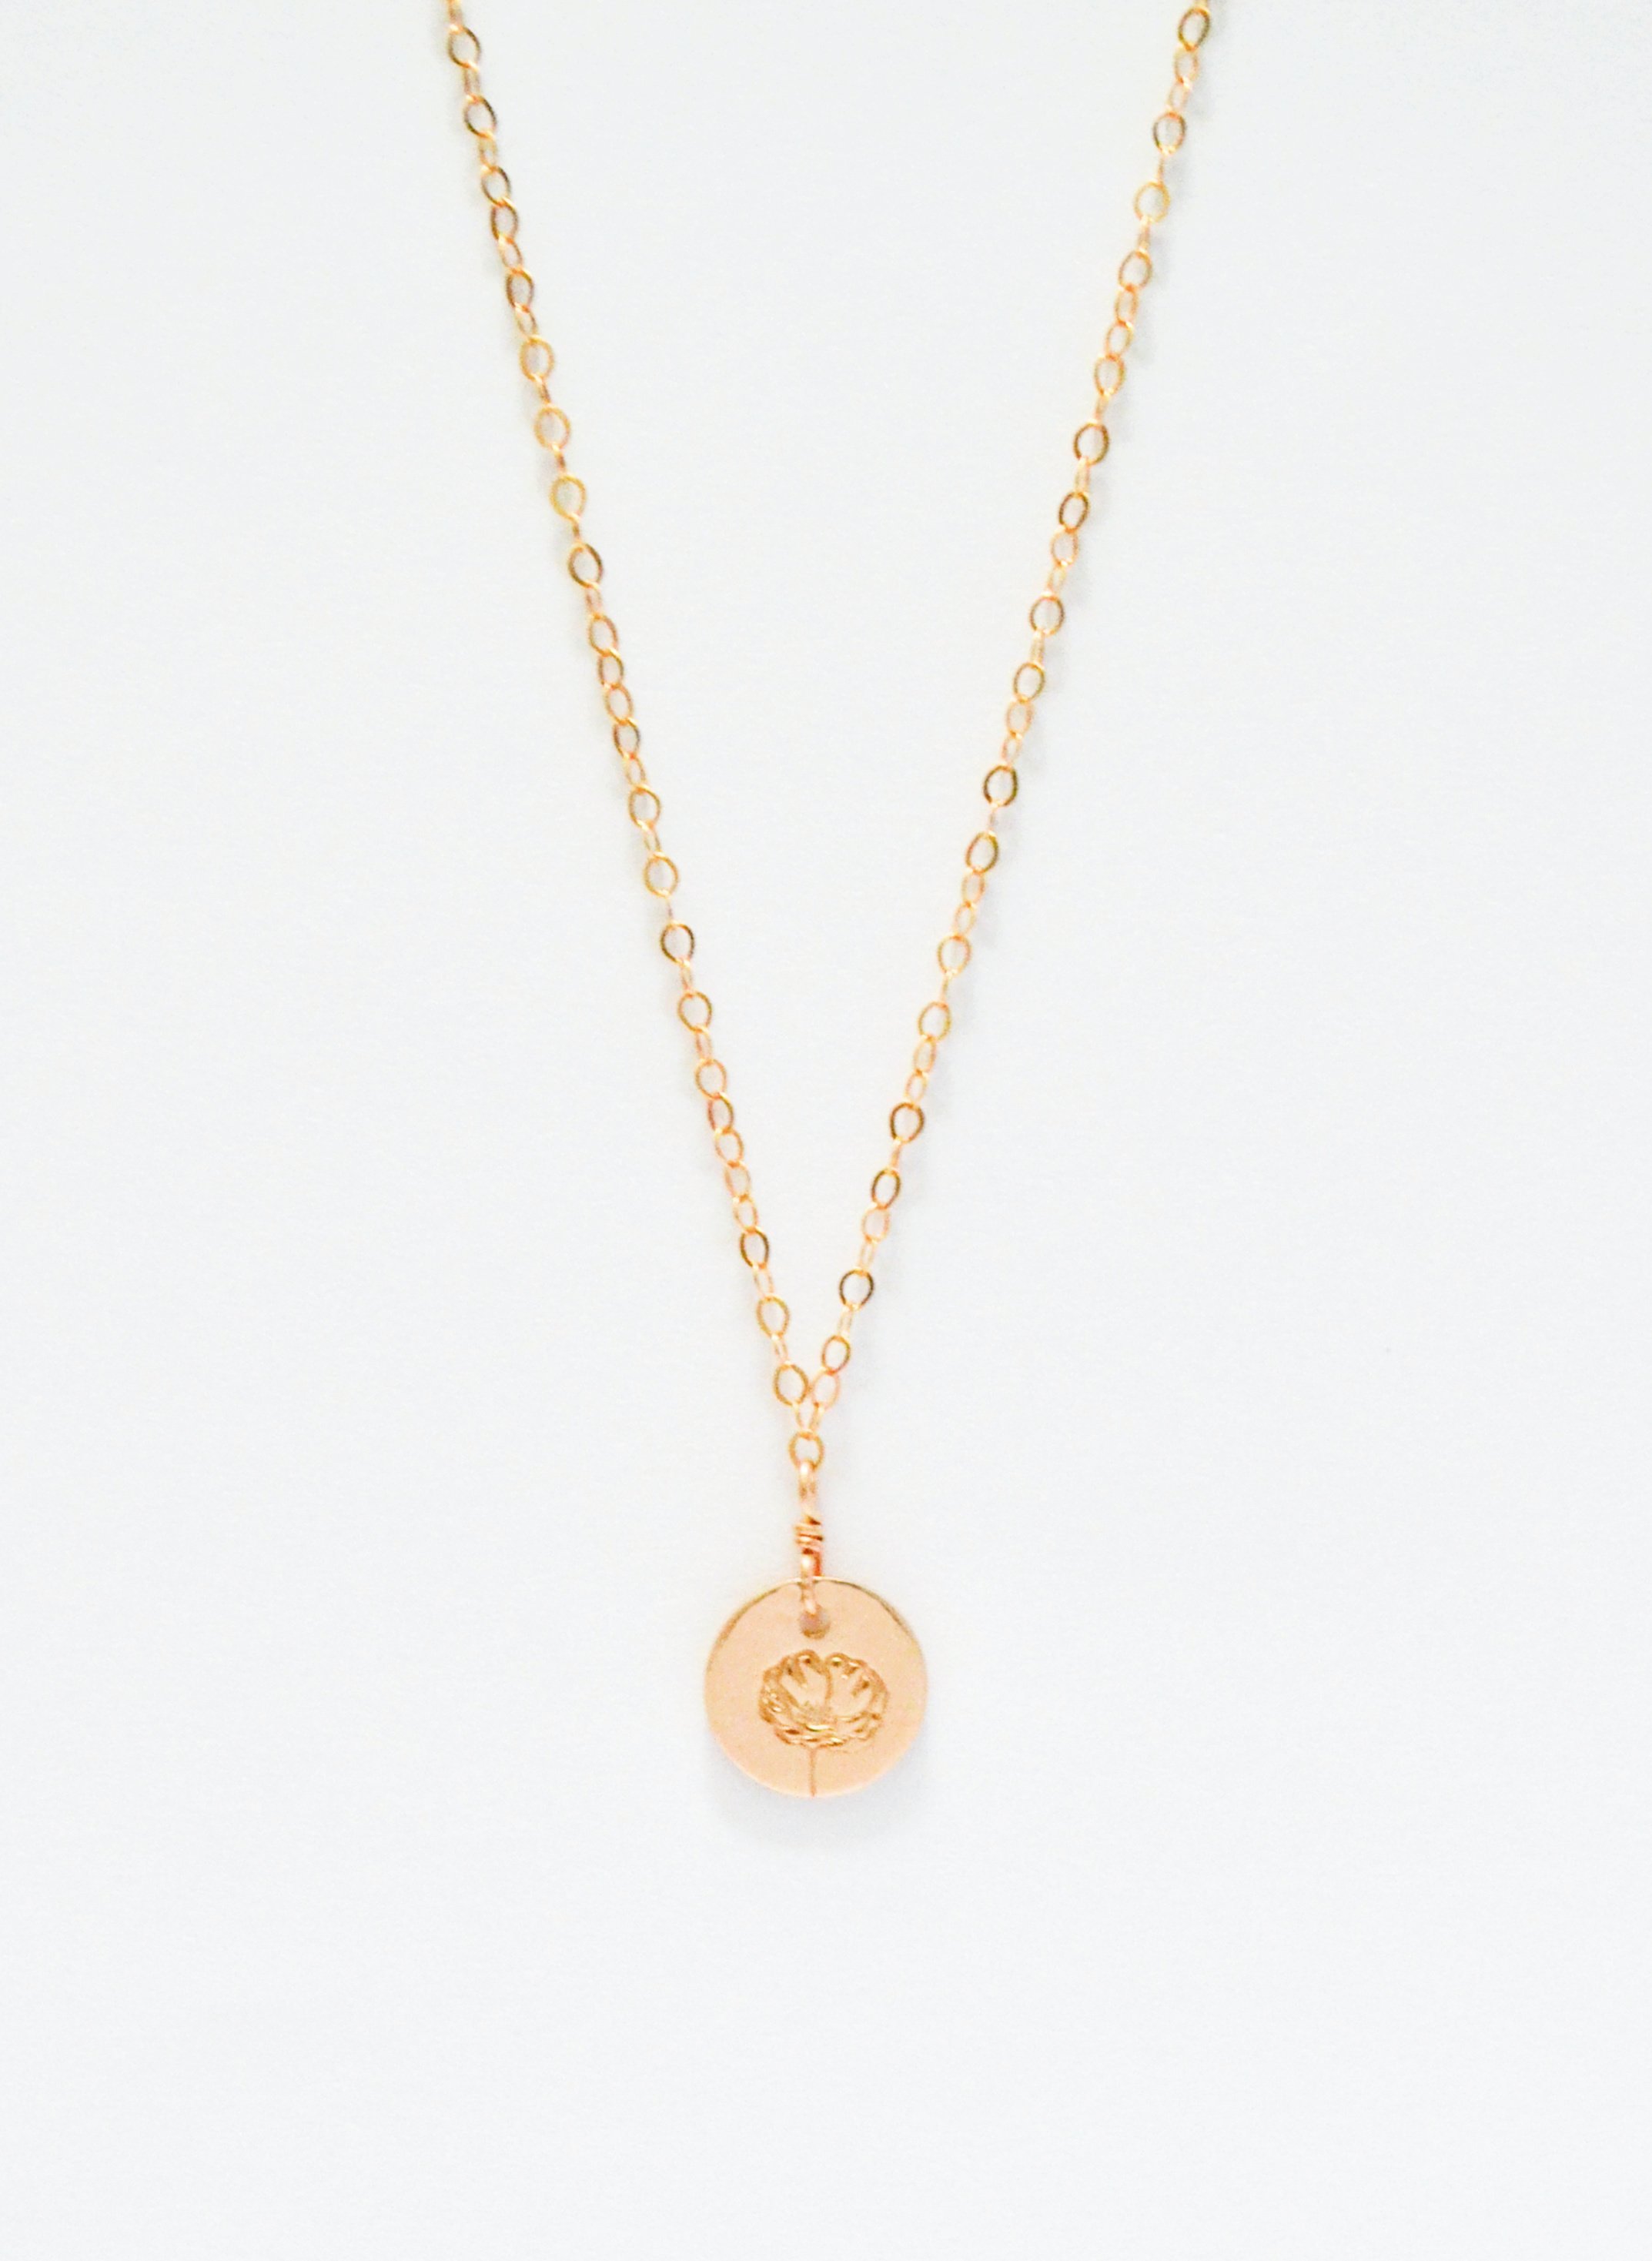 New Arrivals — Boy Cherie Jewelry: Delicate Fashion Jewelry That Won't ...